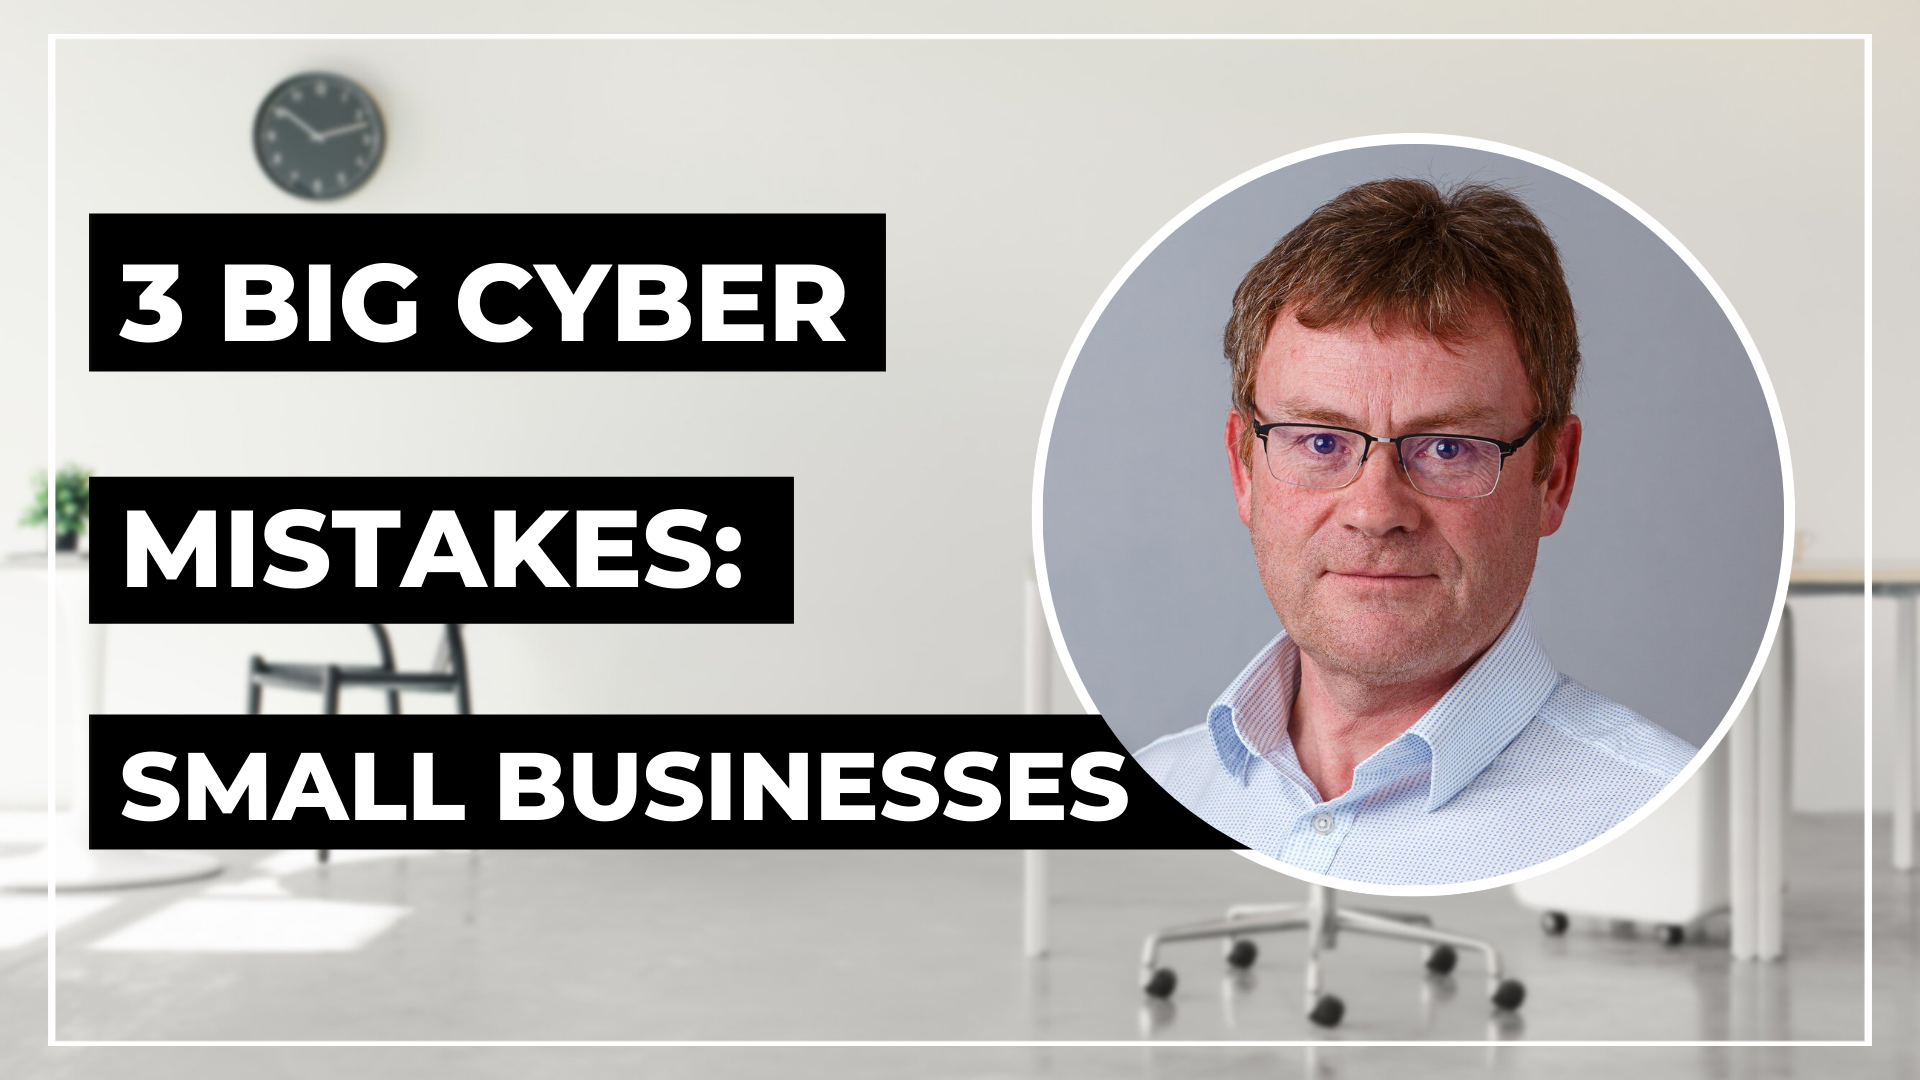 The 3 Big Cyber Mistakes that Most Small Businesses Make